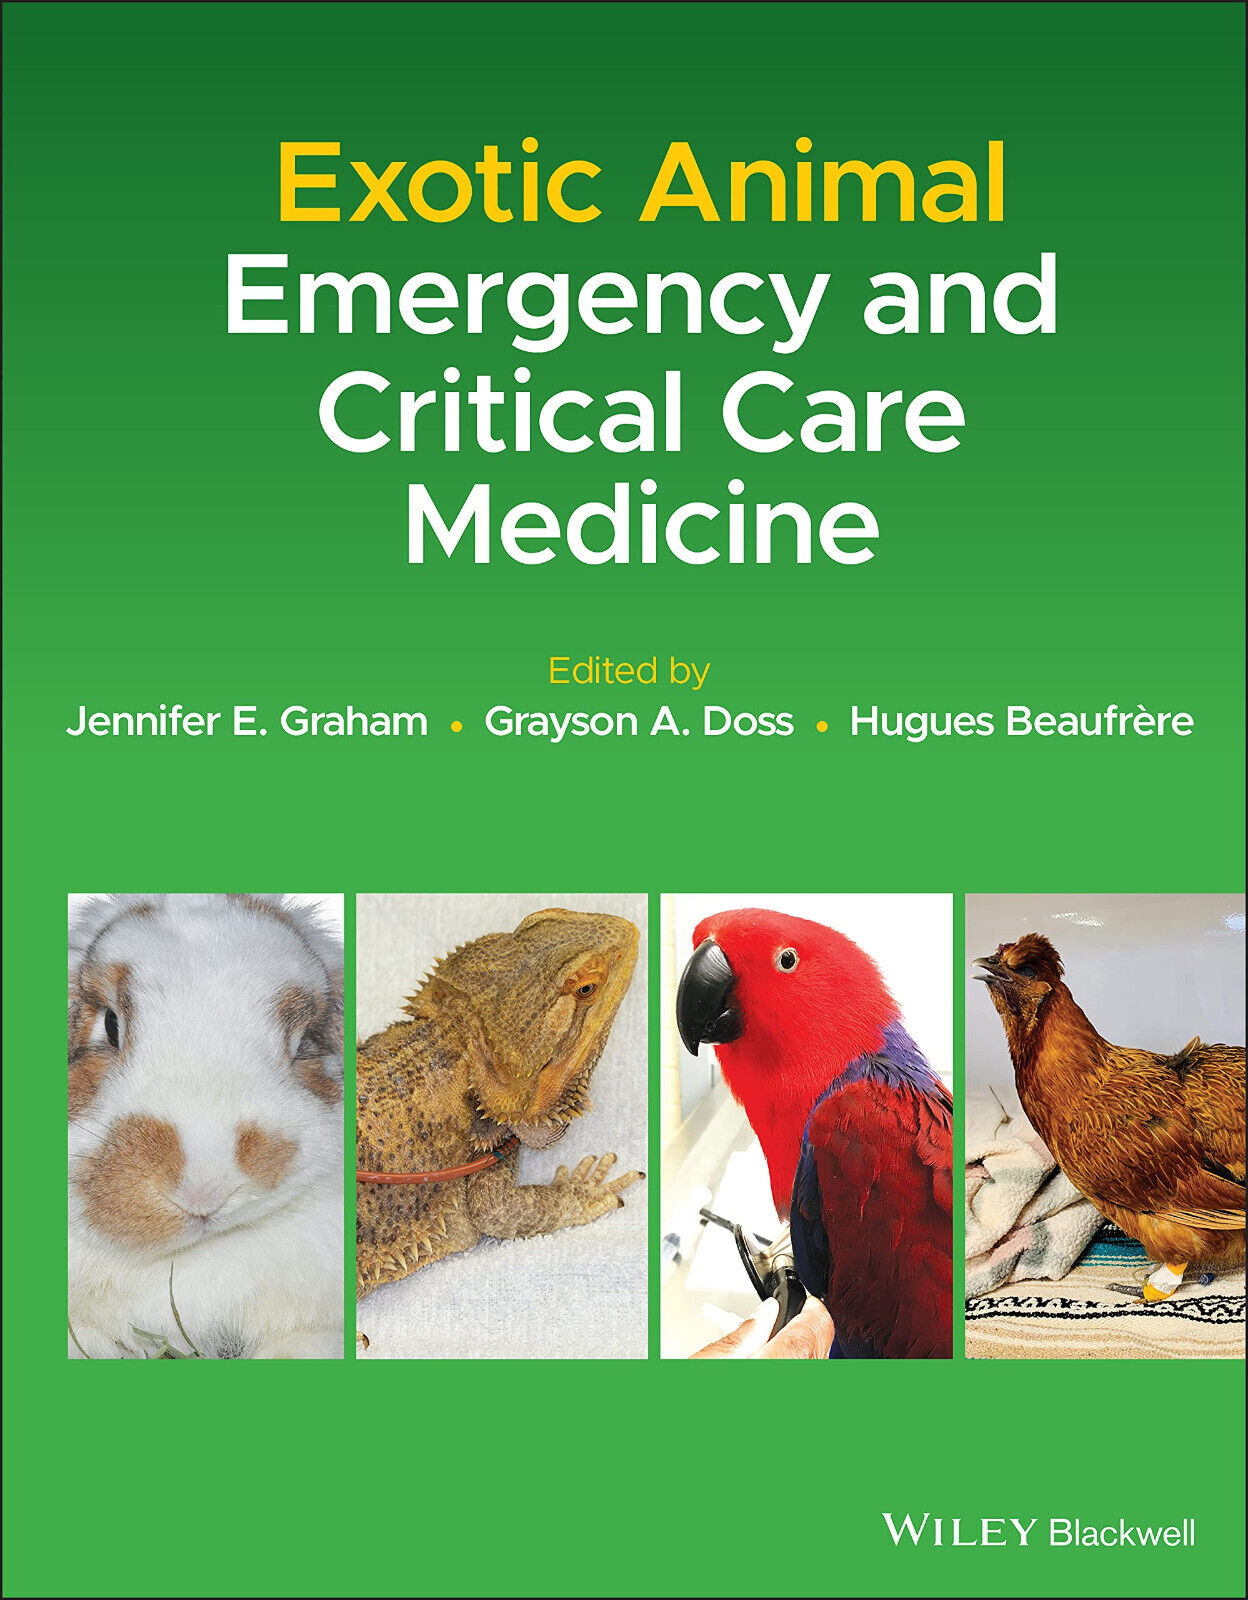 Exotic Animal Emergency and Critical Care Medicine - JE Graham - 2021